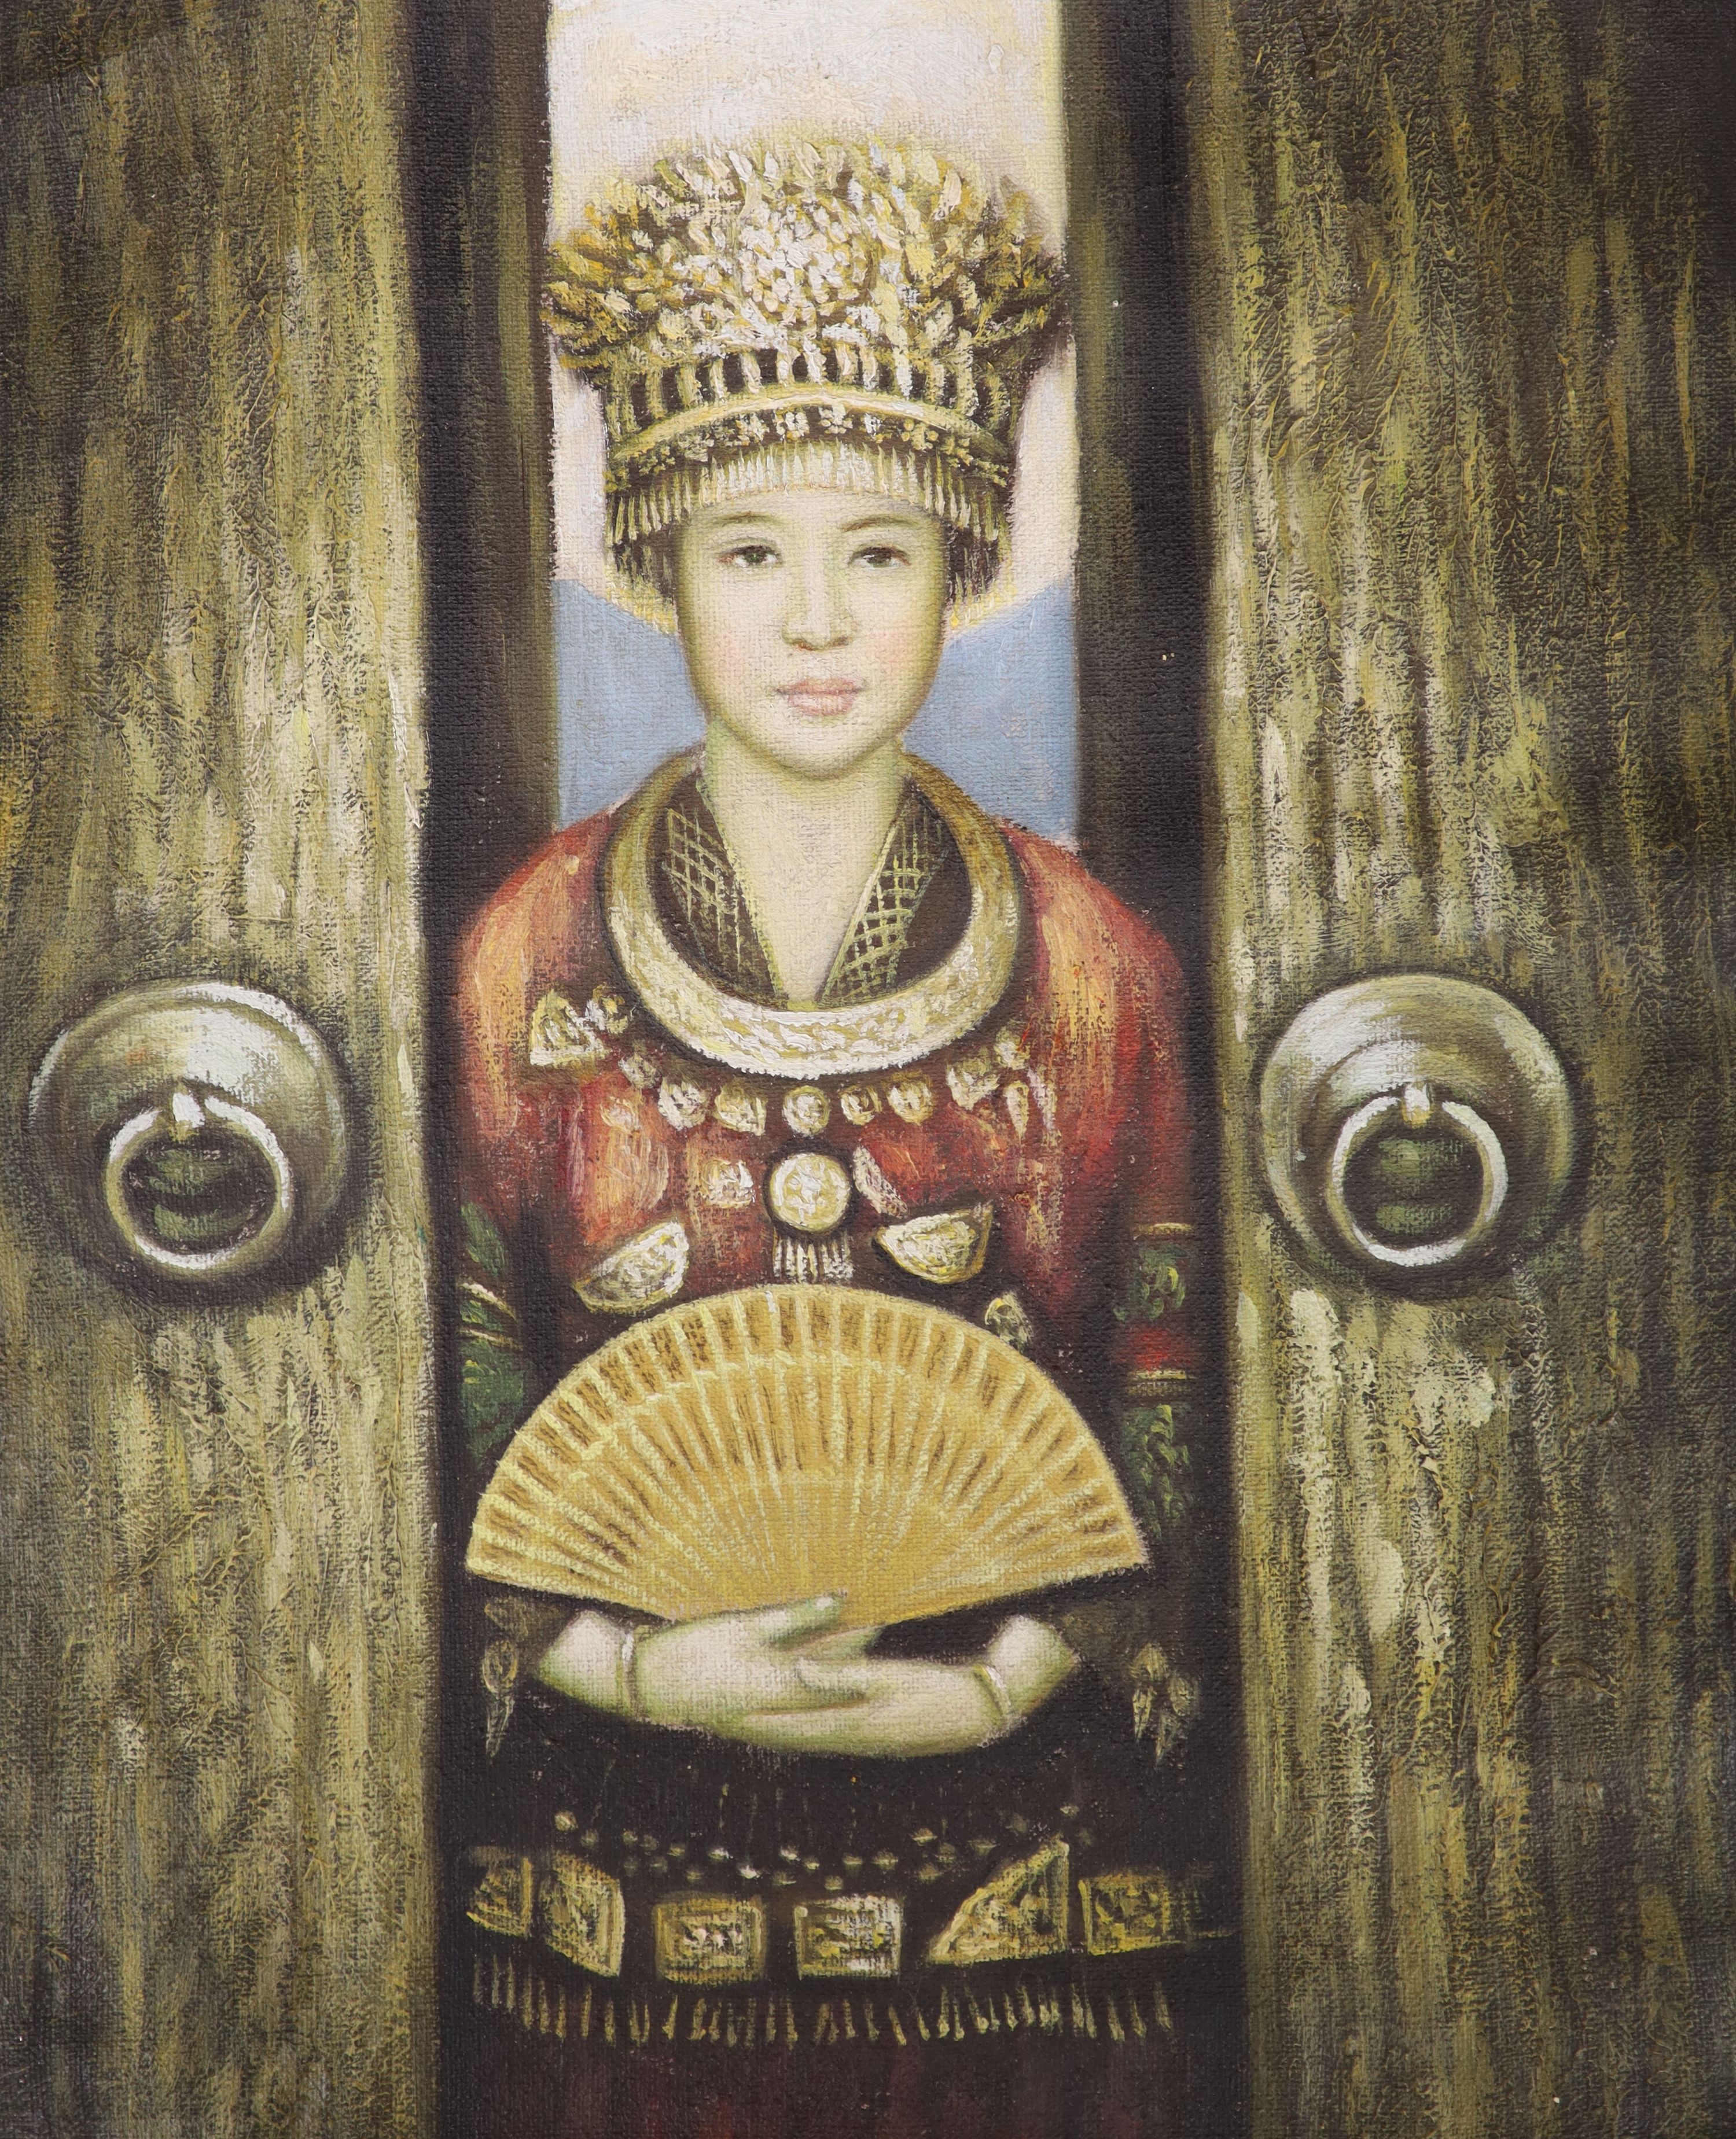 20th century Chinese school, oil on unstretchered canvas, Tibetan woman holding a fan, 32 x 26cm